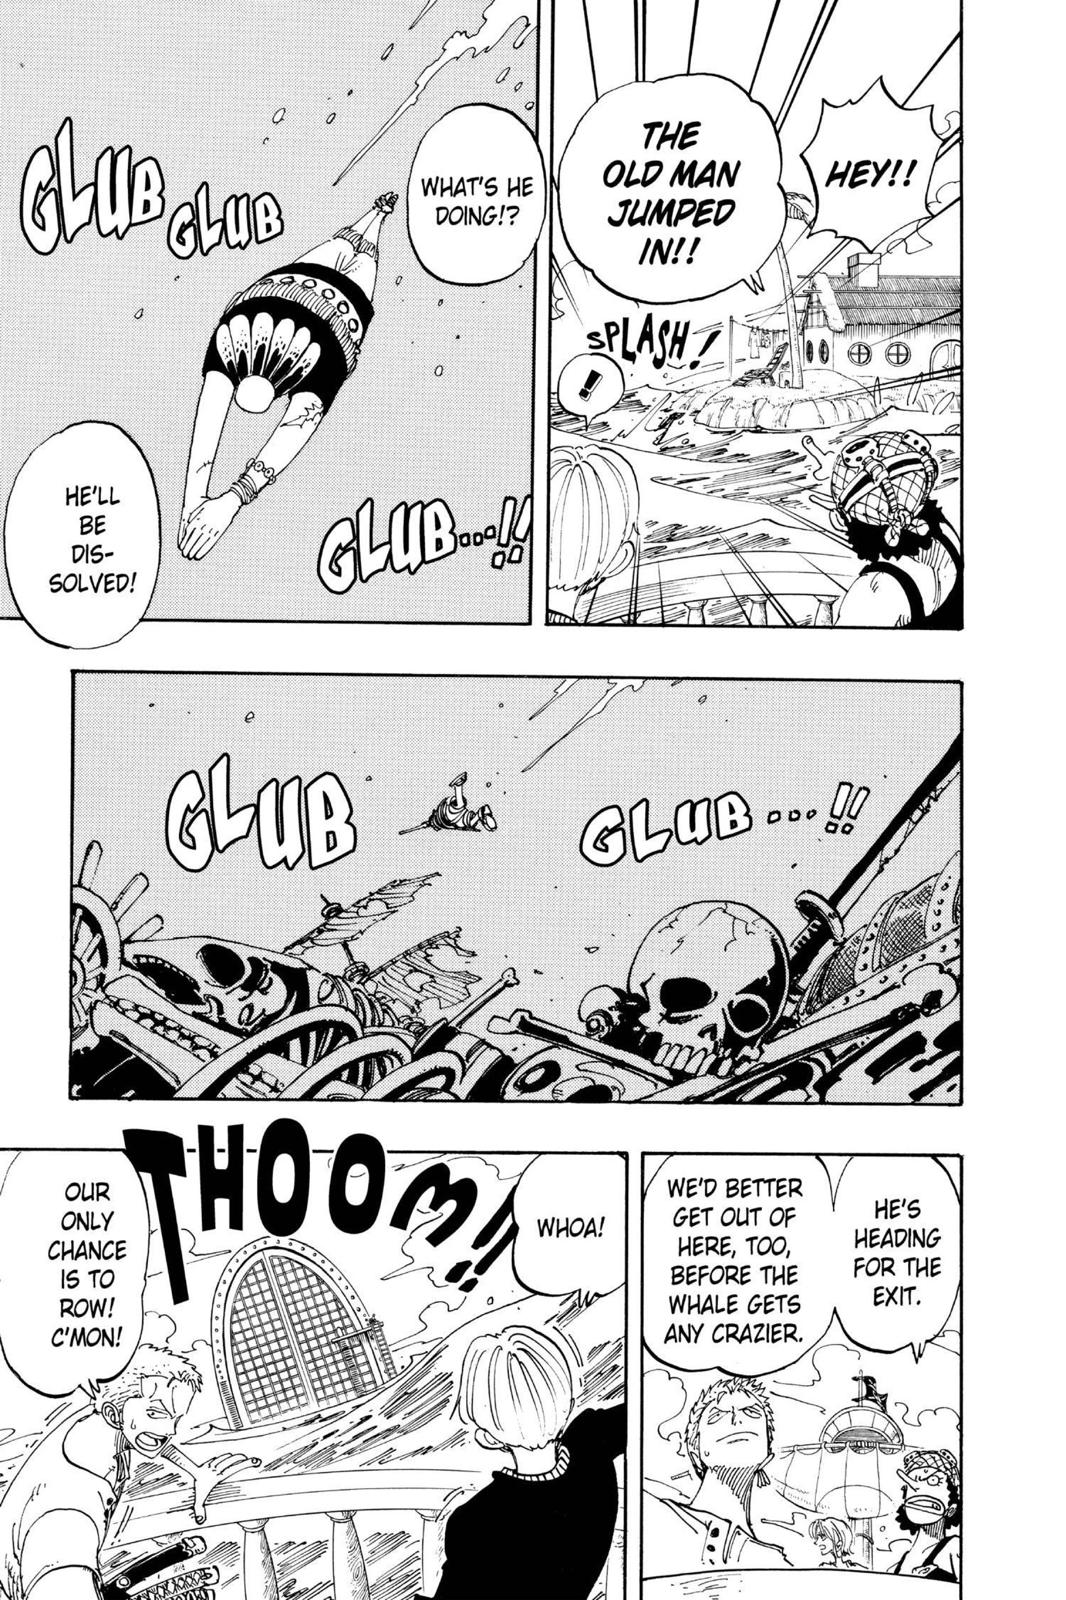 One Piece, Chapter 103 - One Piece Manga Online